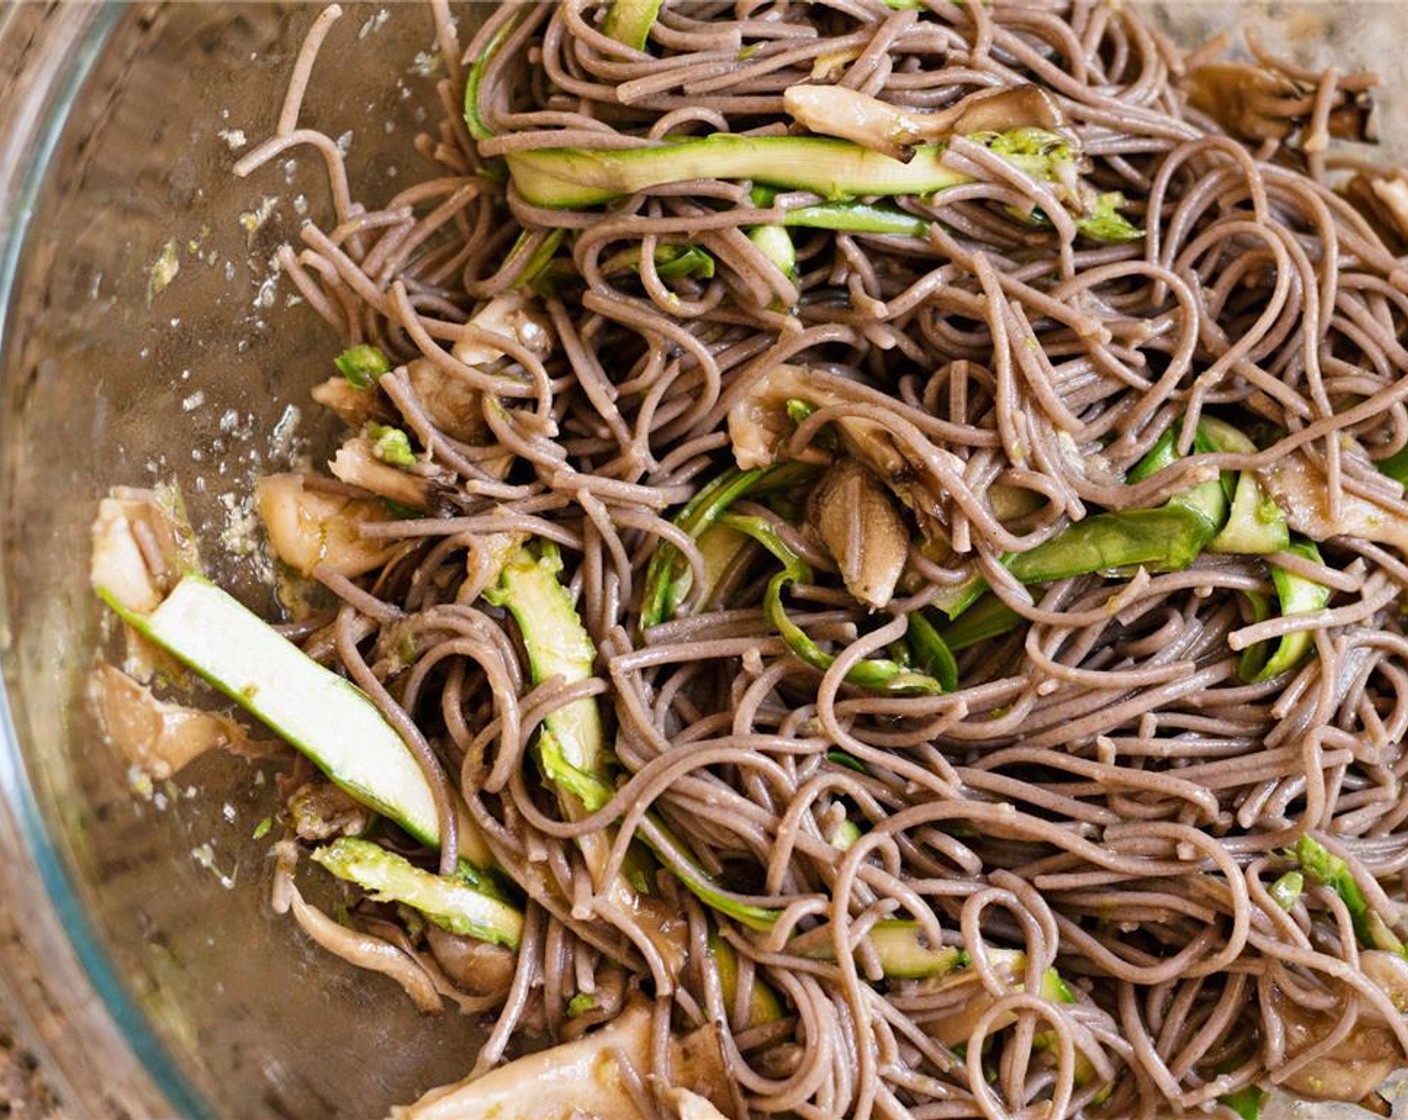 step 7 Toss the noodles with the vegetables. Store up to two days in the fridge. Garnish with Black Sesame Seeds (to taste) and Avocado (1) if using. Serve at room temperature or chilled.